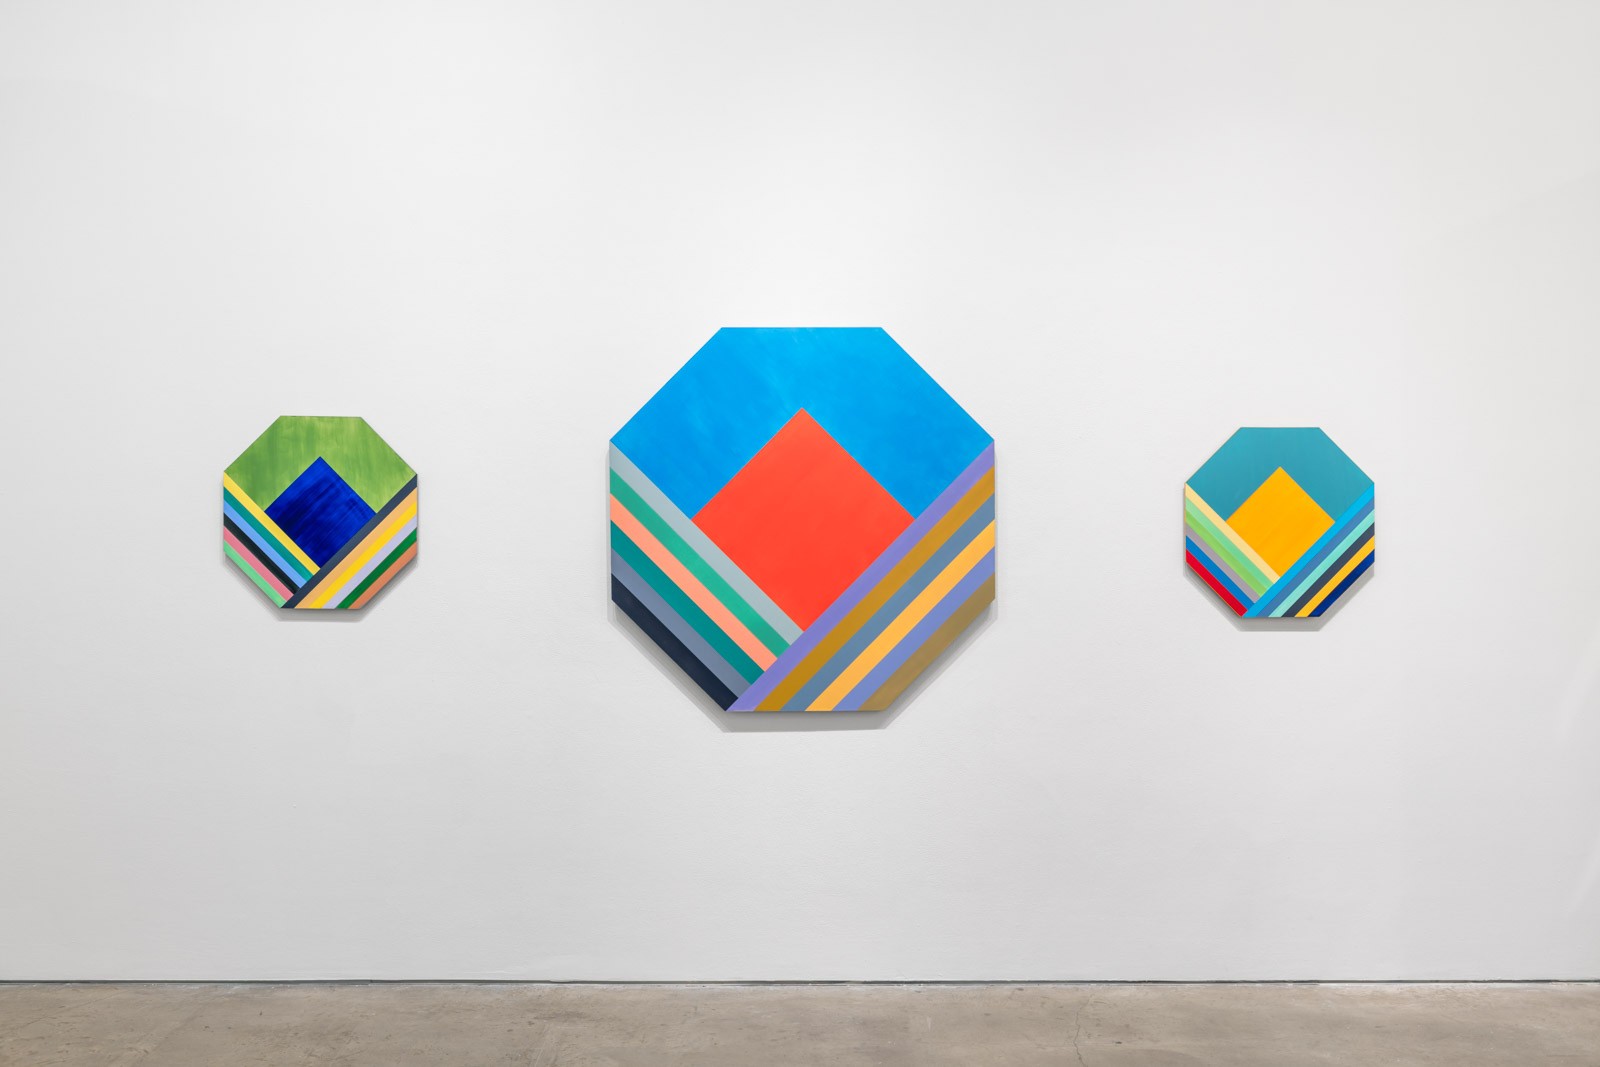 Installation view of ORRA paintings